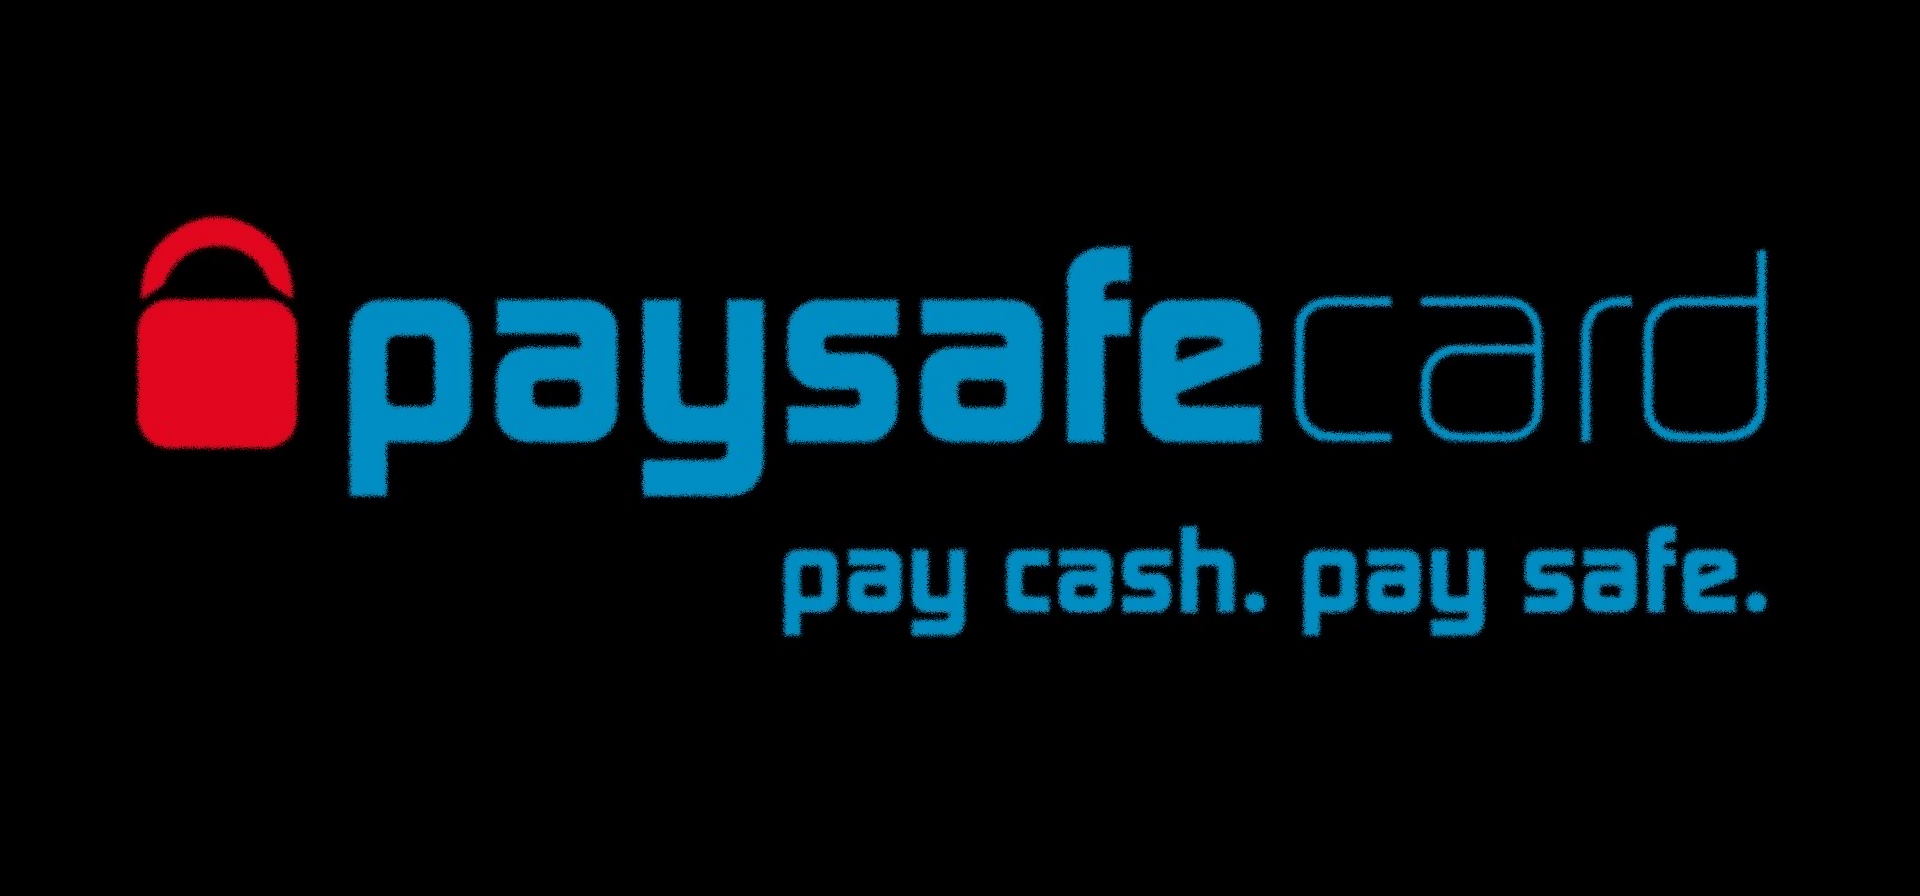 paysafecard Poker | How to Play Online with paysafecard